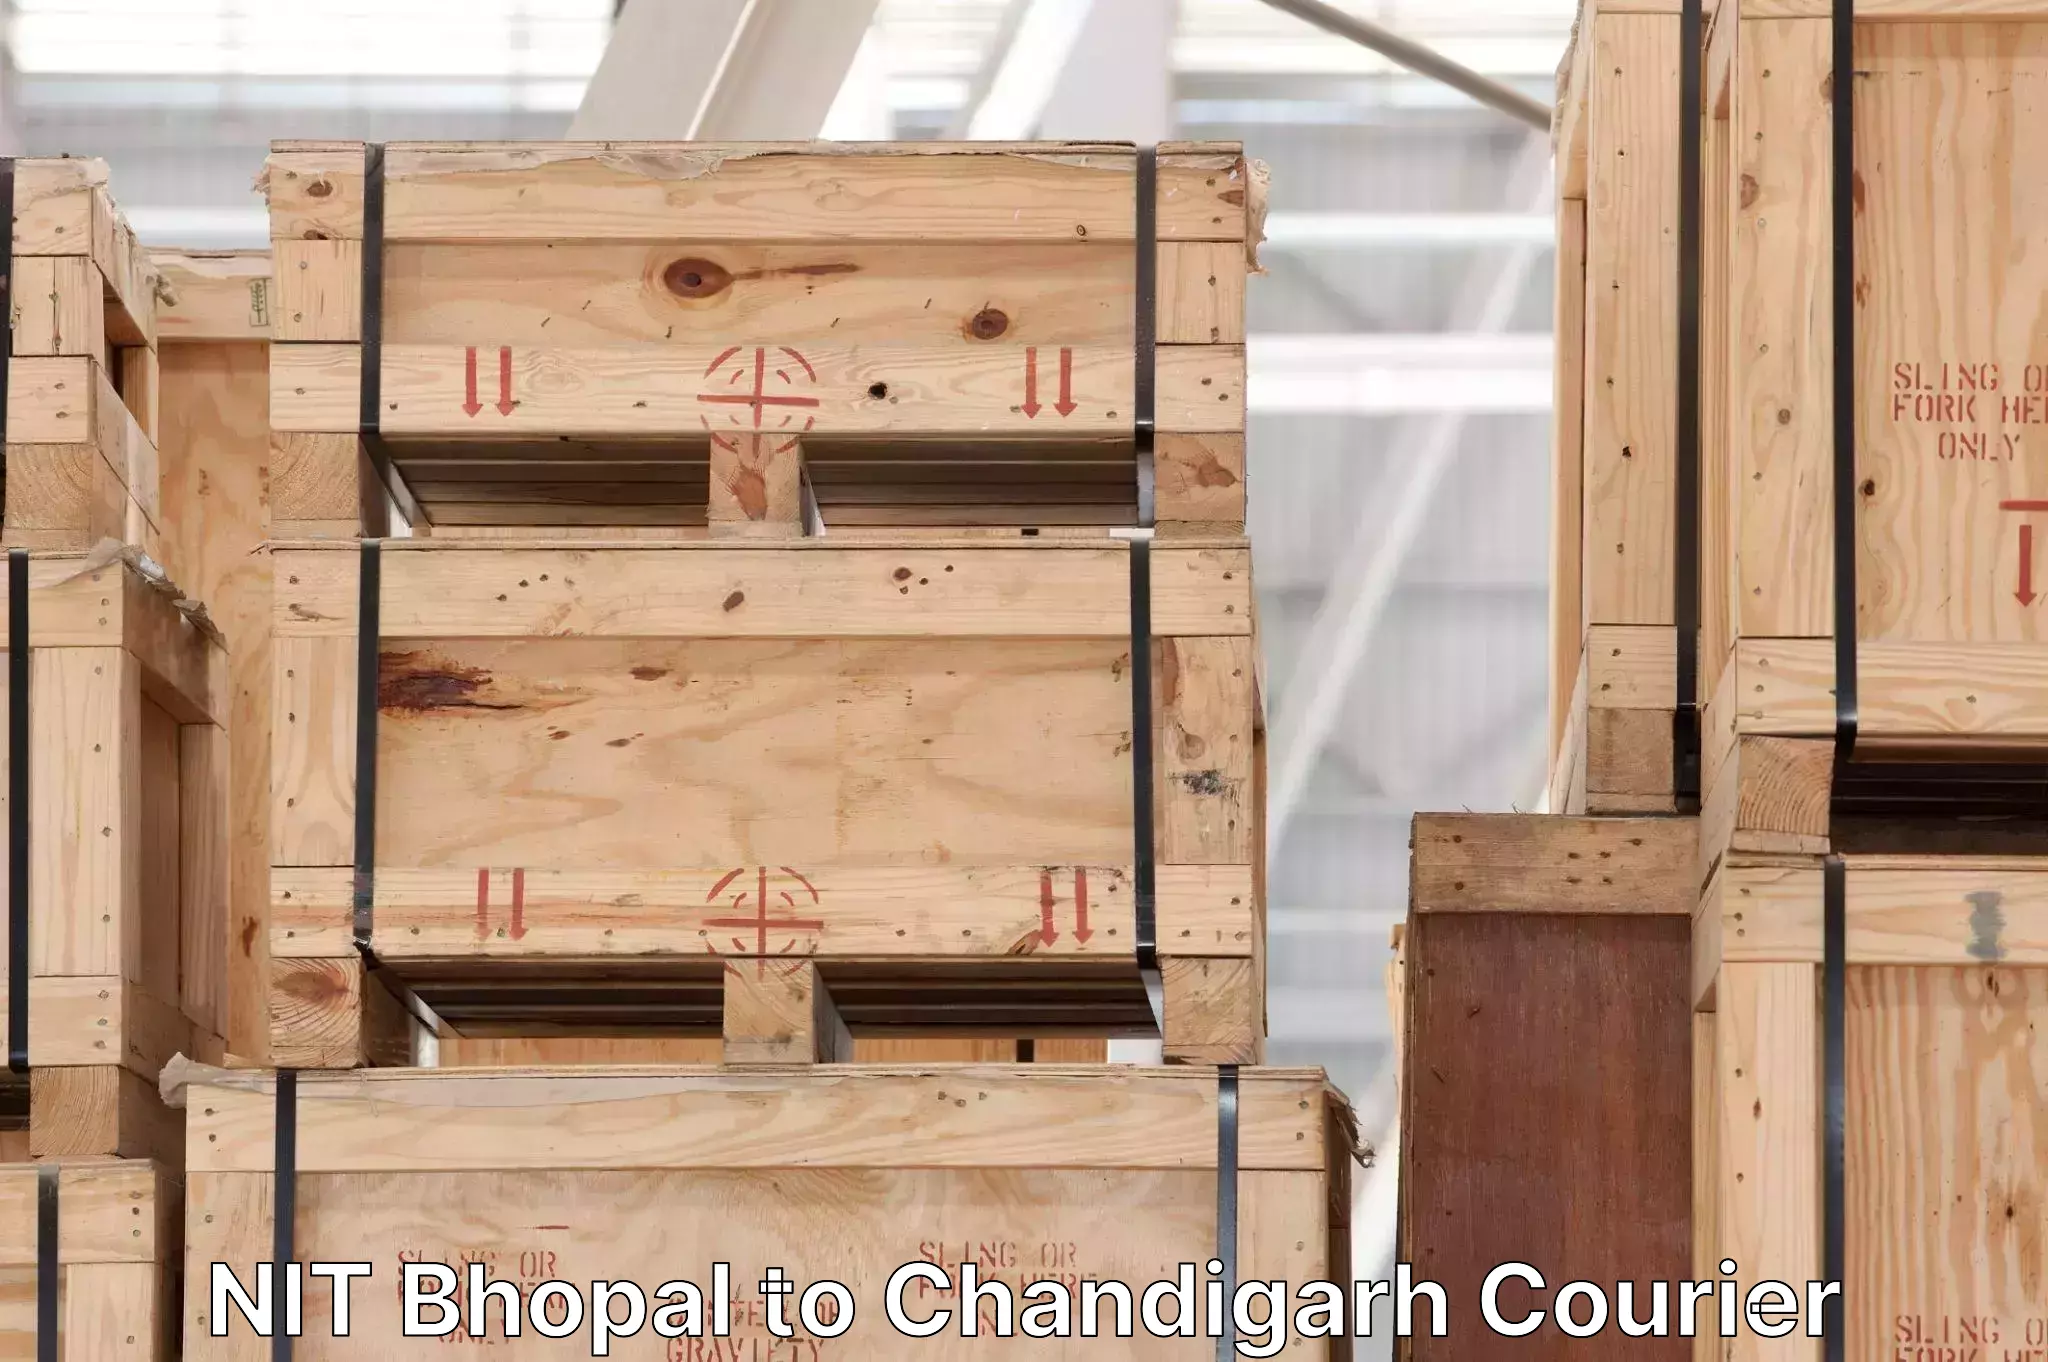 Courier dispatch services NIT Bhopal to Chandigarh